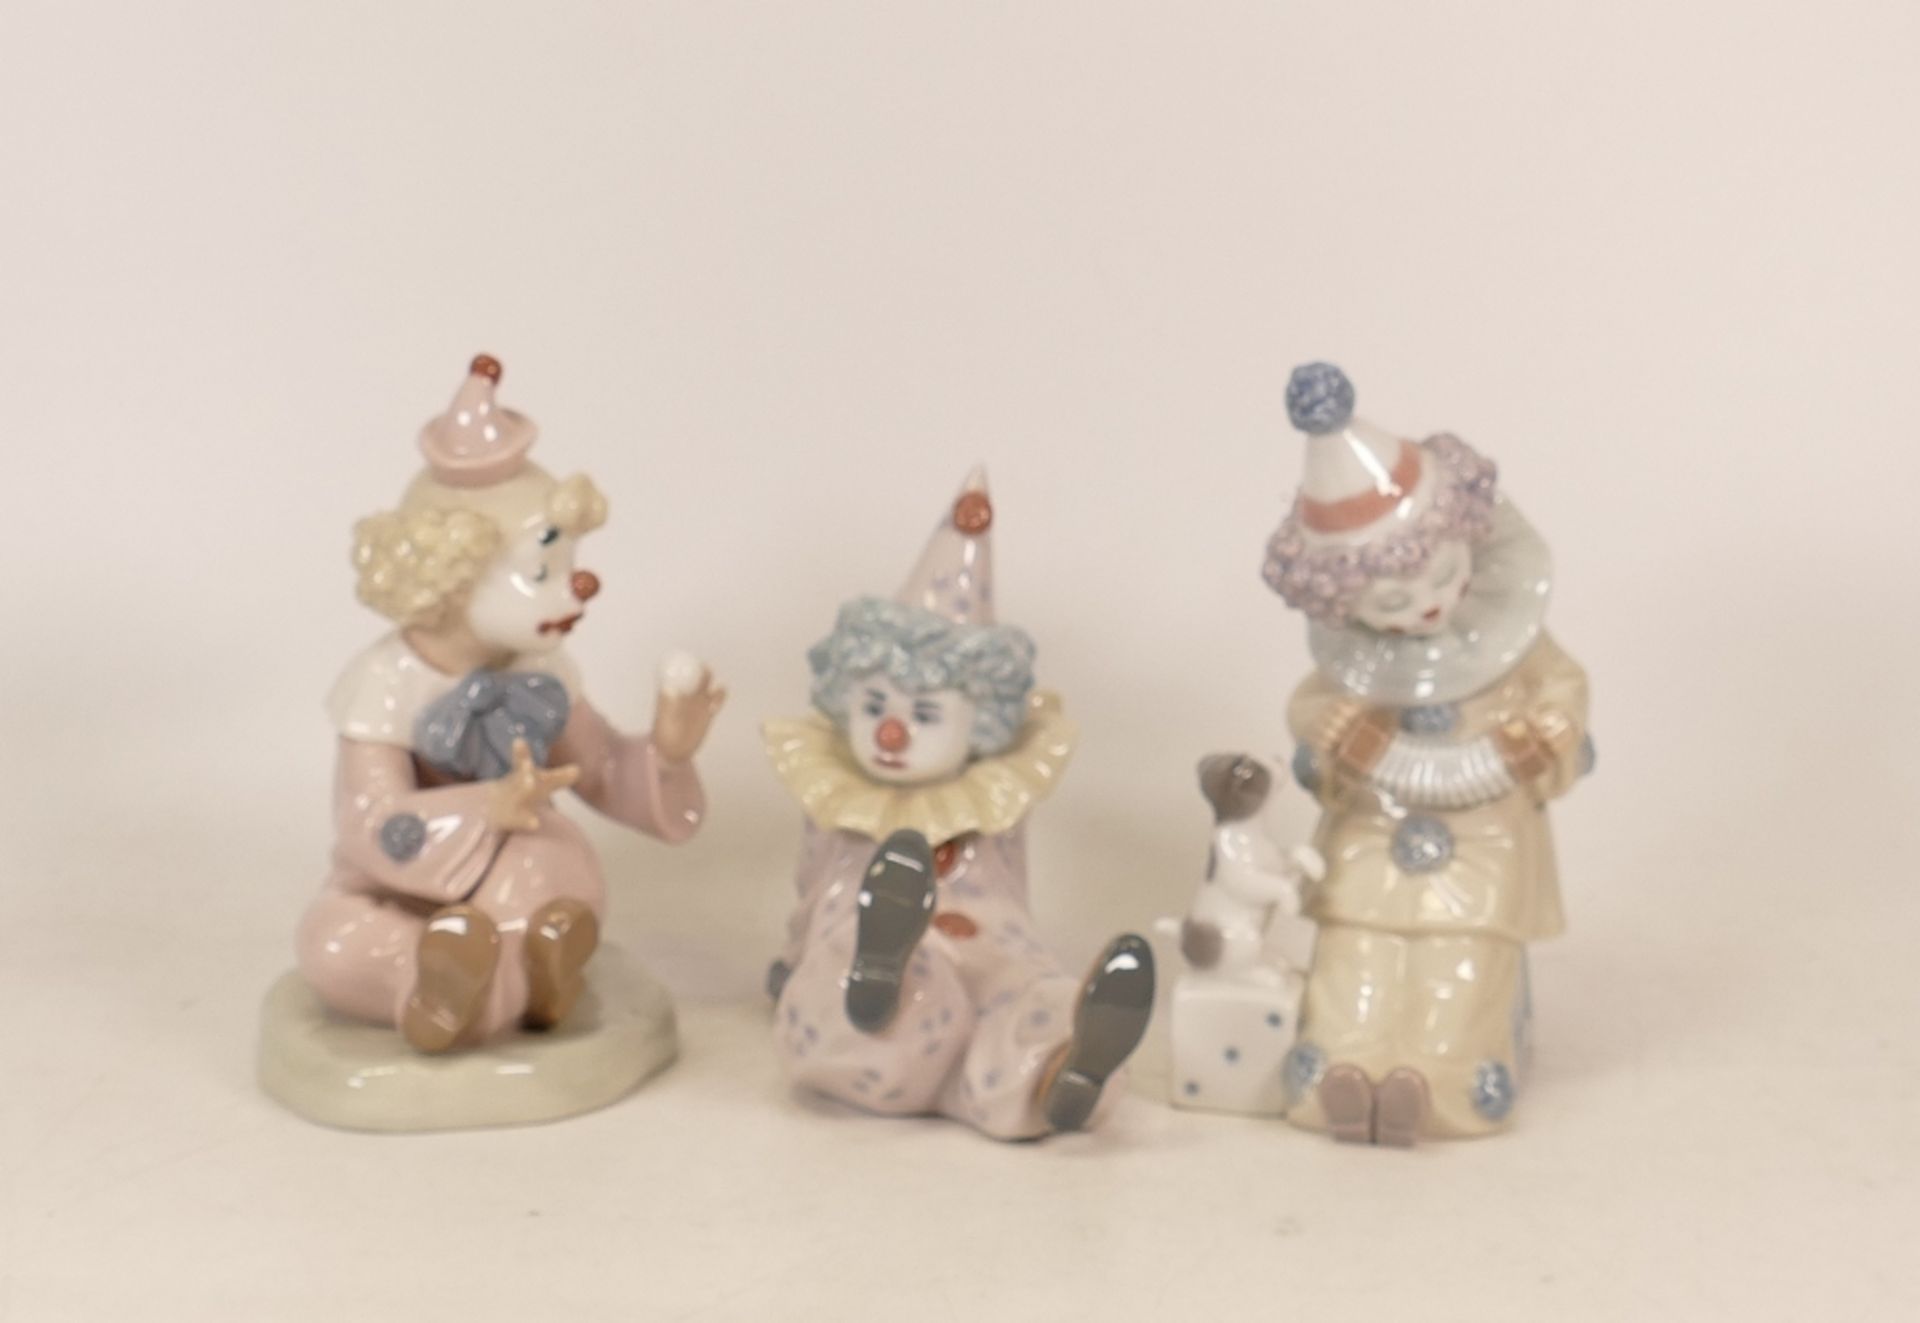 Lladro figures Pierrot with Puppy 5279 and Tired Friend 5812 together with Nao figure clown with